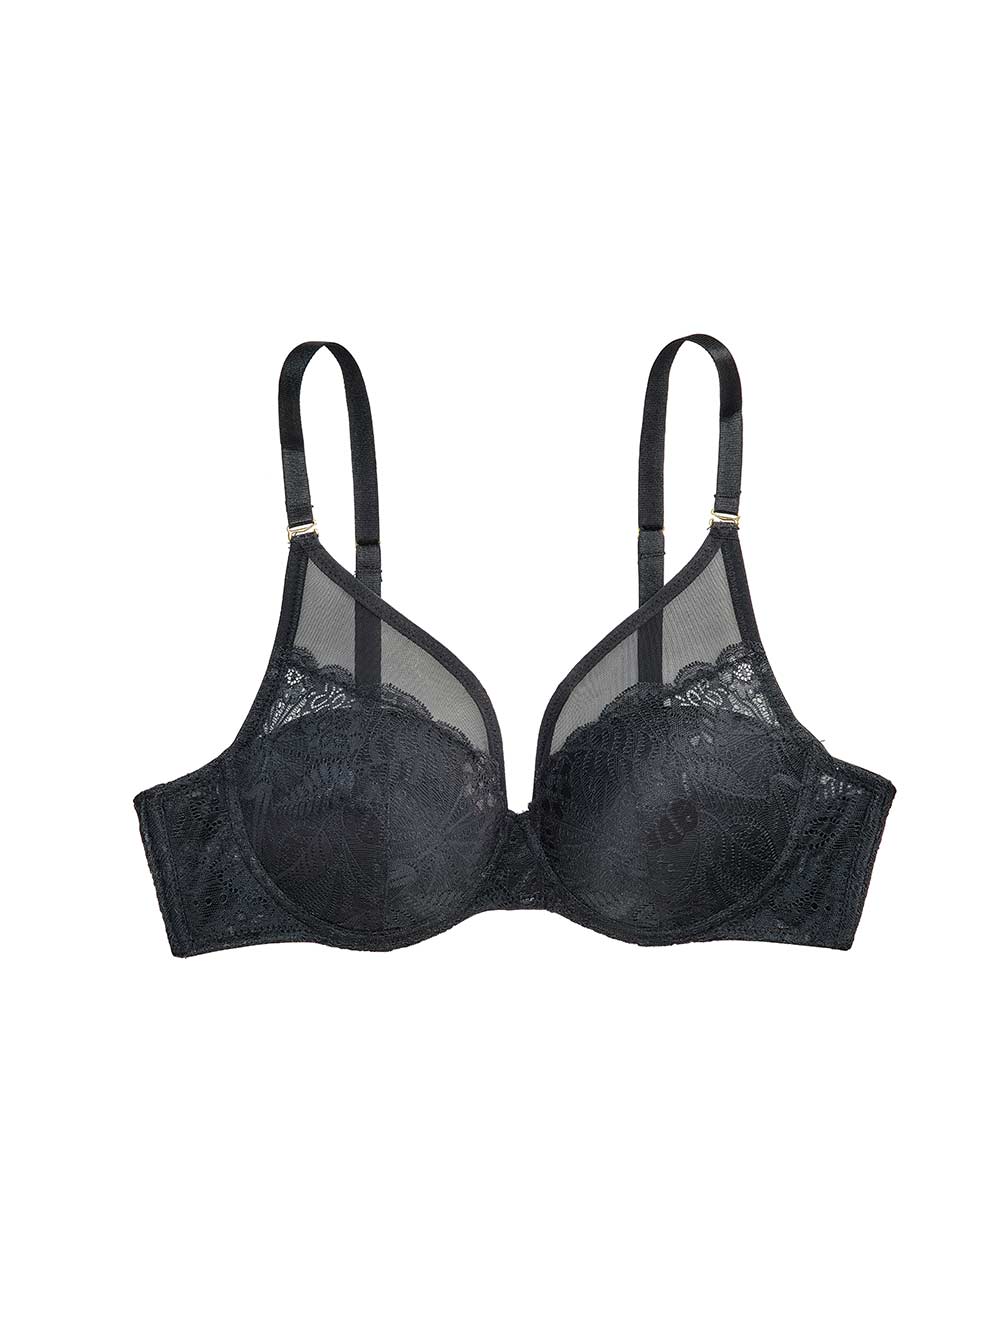 Braza Cups 'N Lace Bralette And Boyshort Set